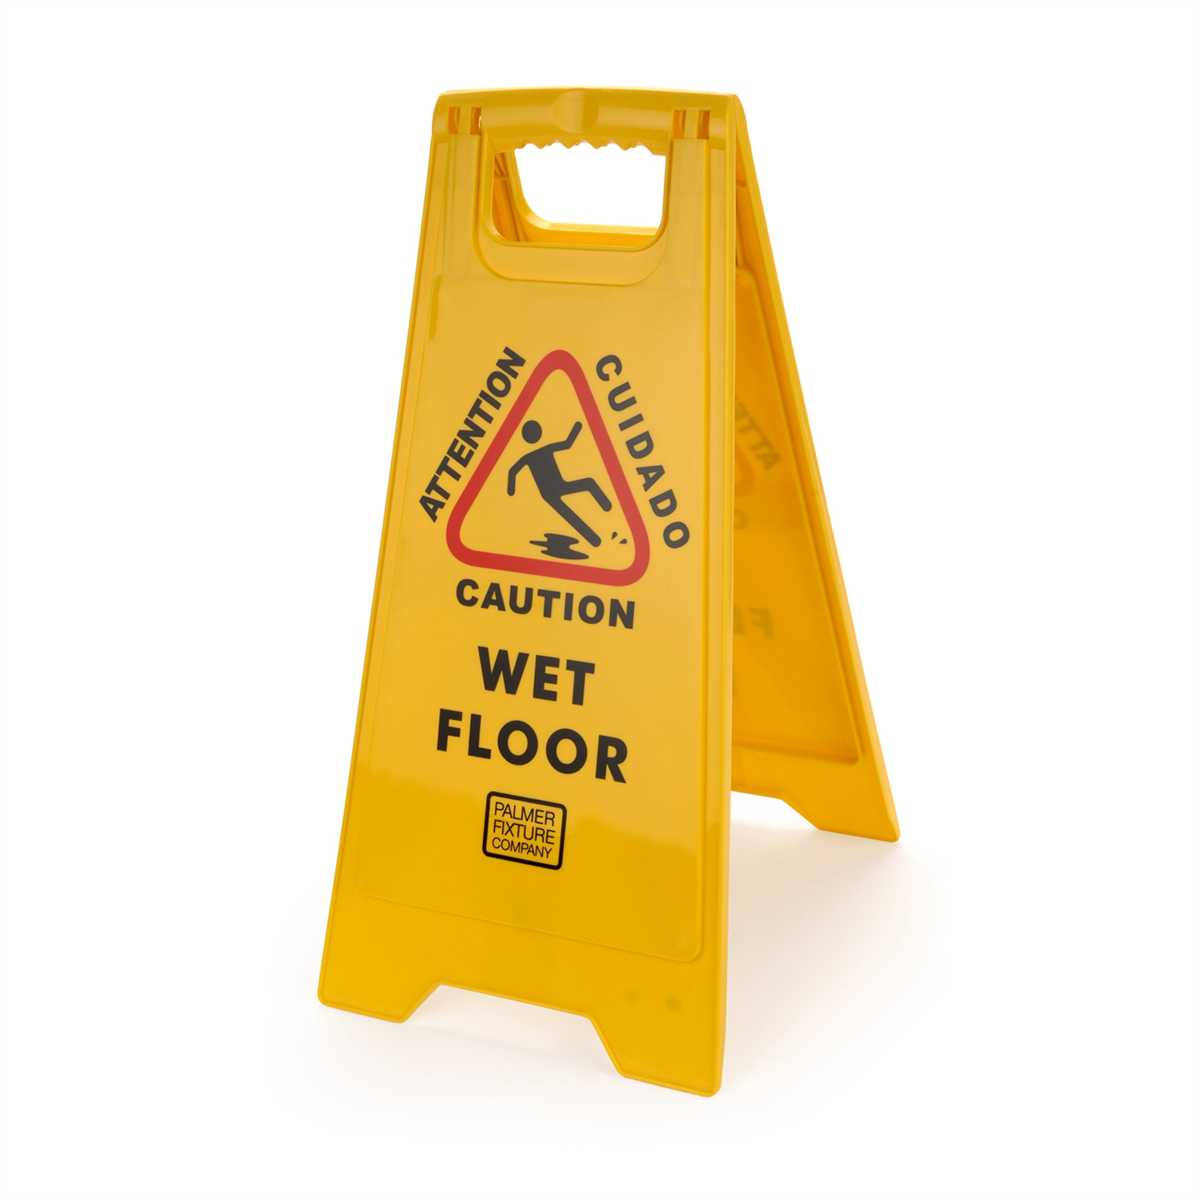 SIGN WET FLOOR CAUTION TWO
SIDED BILINGUAL